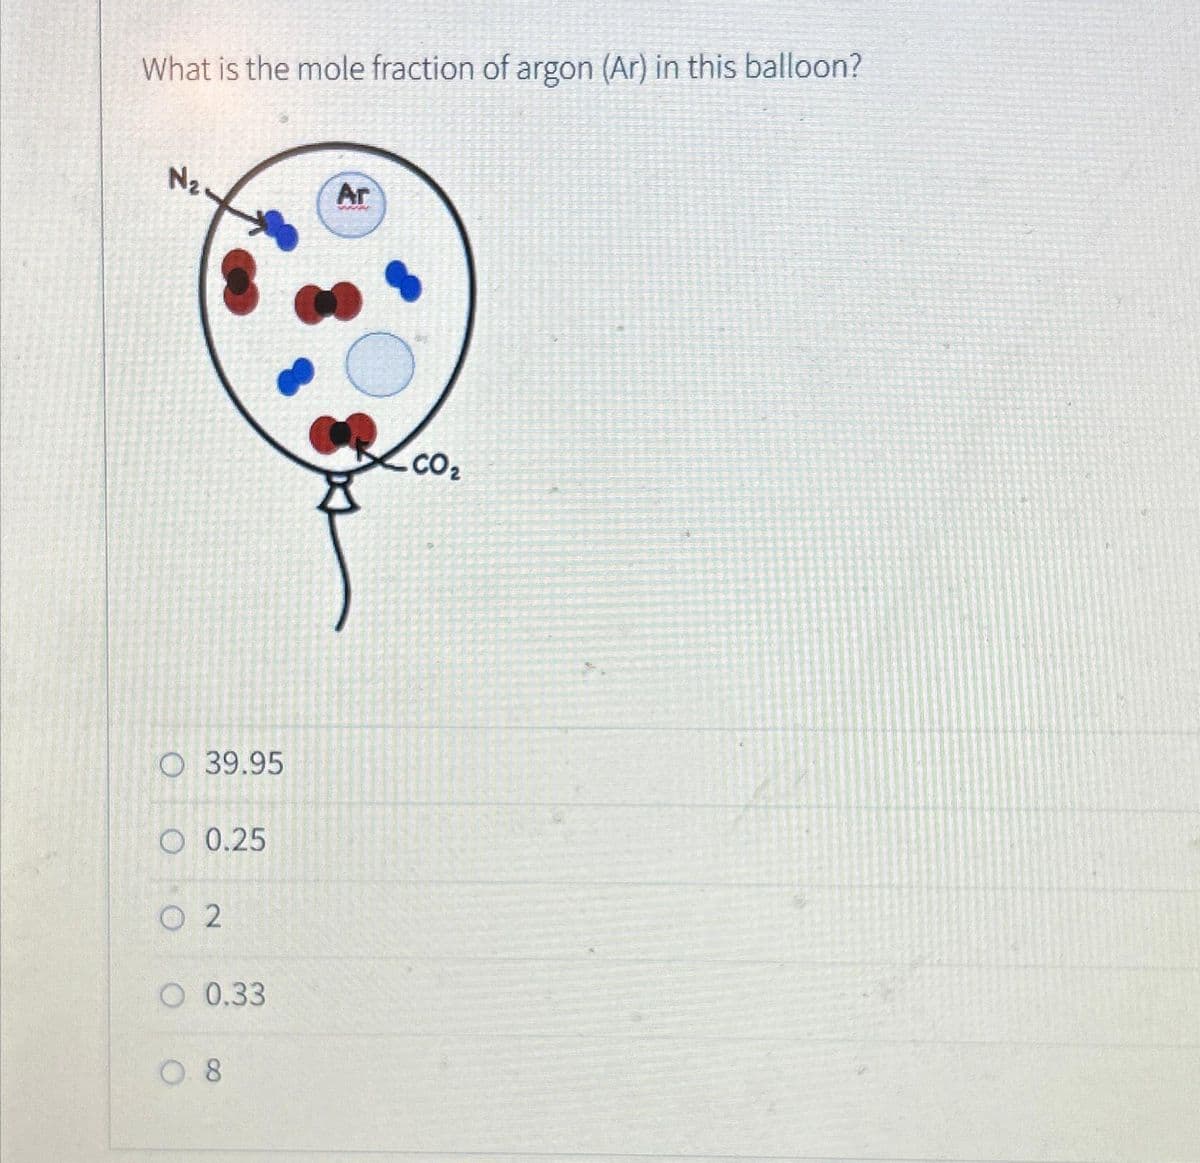 What is the mole fraction of argon (Ar) in this balloon?
N₂
O 39.95
O 0.25
02
O 0.33
0.8
Ar
-
CO₂